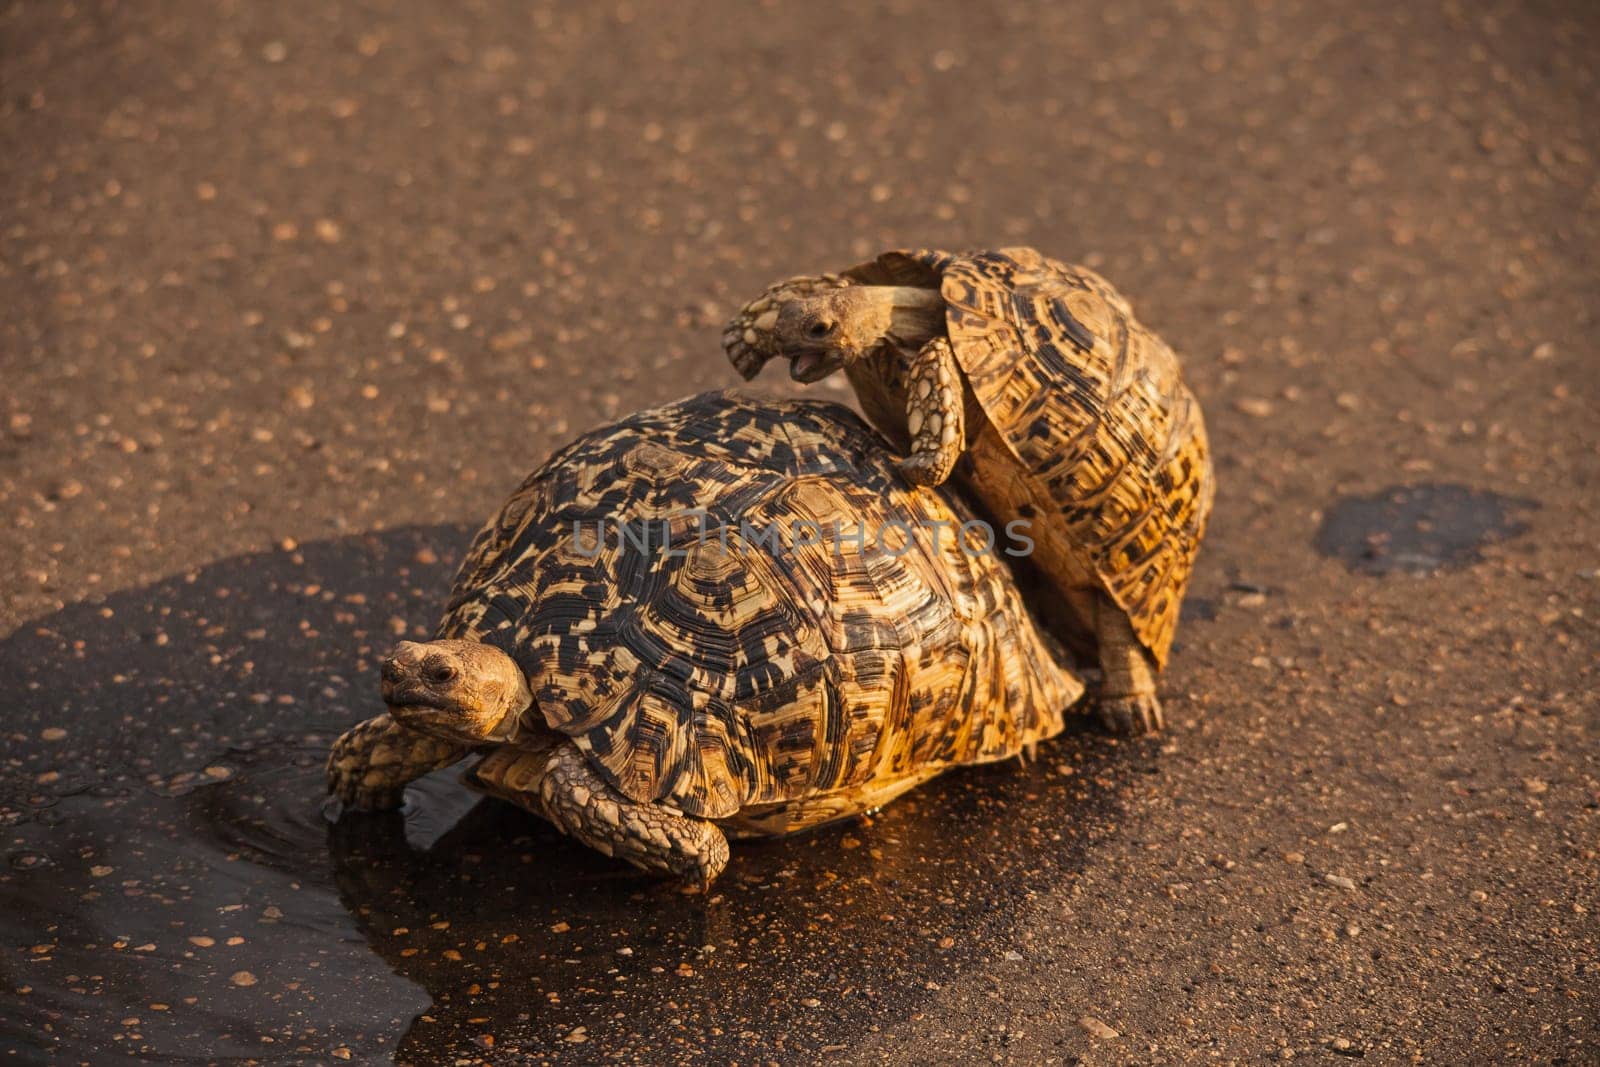 The attractively marked Leopard Tortoise (Stigmochelys pardalis) is the largest species of tortoise in southern Africa.